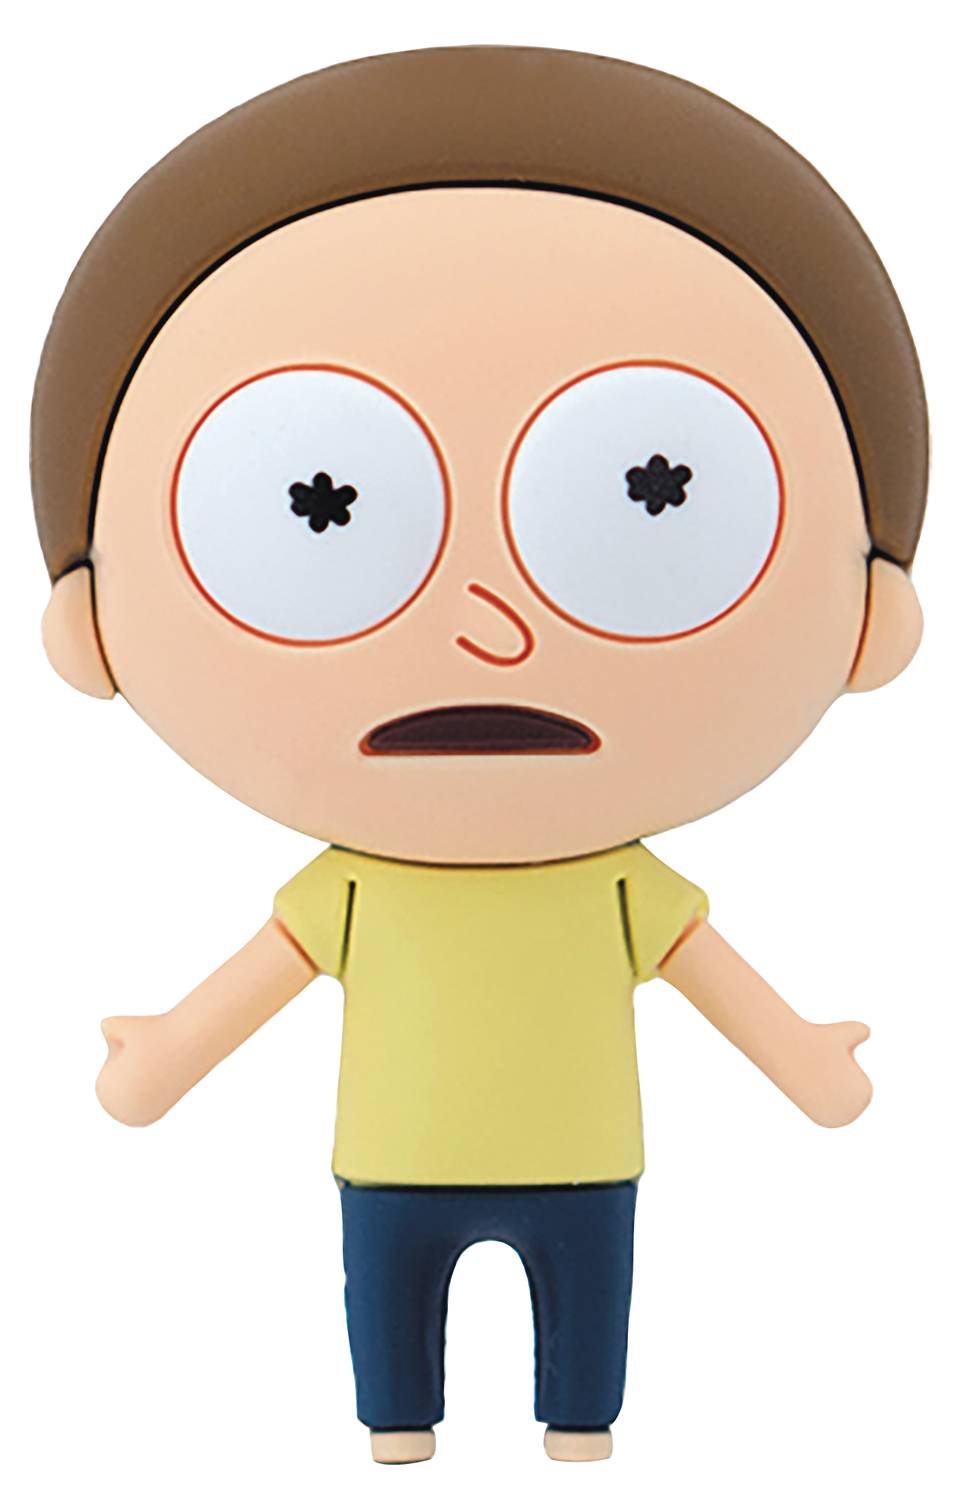 Rick and Morty Morty 3D Foam Magnet